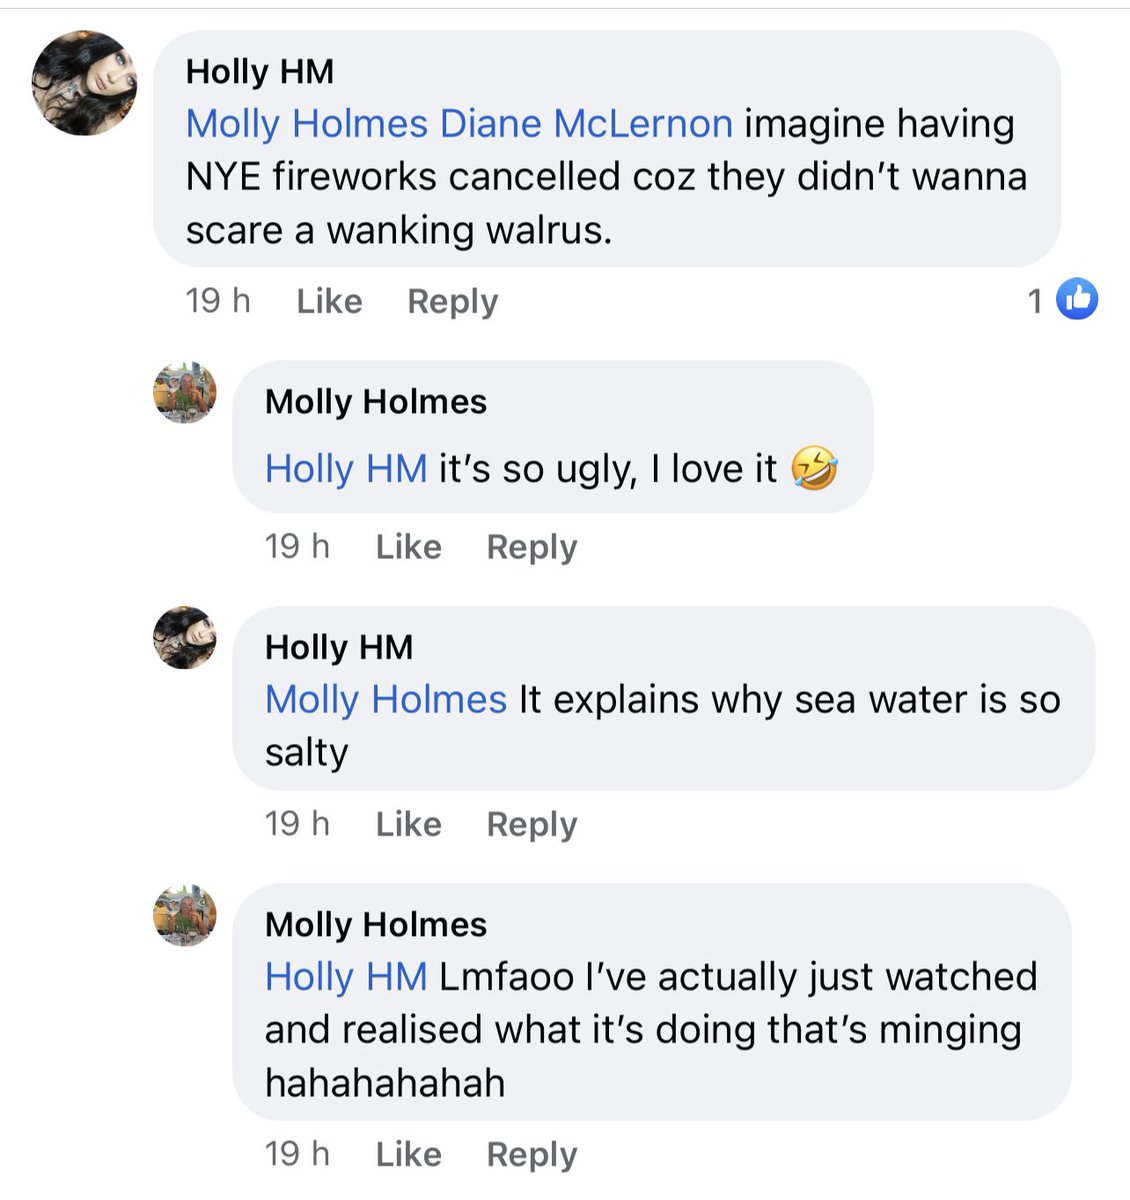 So I was having a laugh with my cousins girlfriend about Thor the walrus, when this random ugly man decided to involve himself. Why is Facebook just full of whoppers? https://t.co/LxNejxuloJ